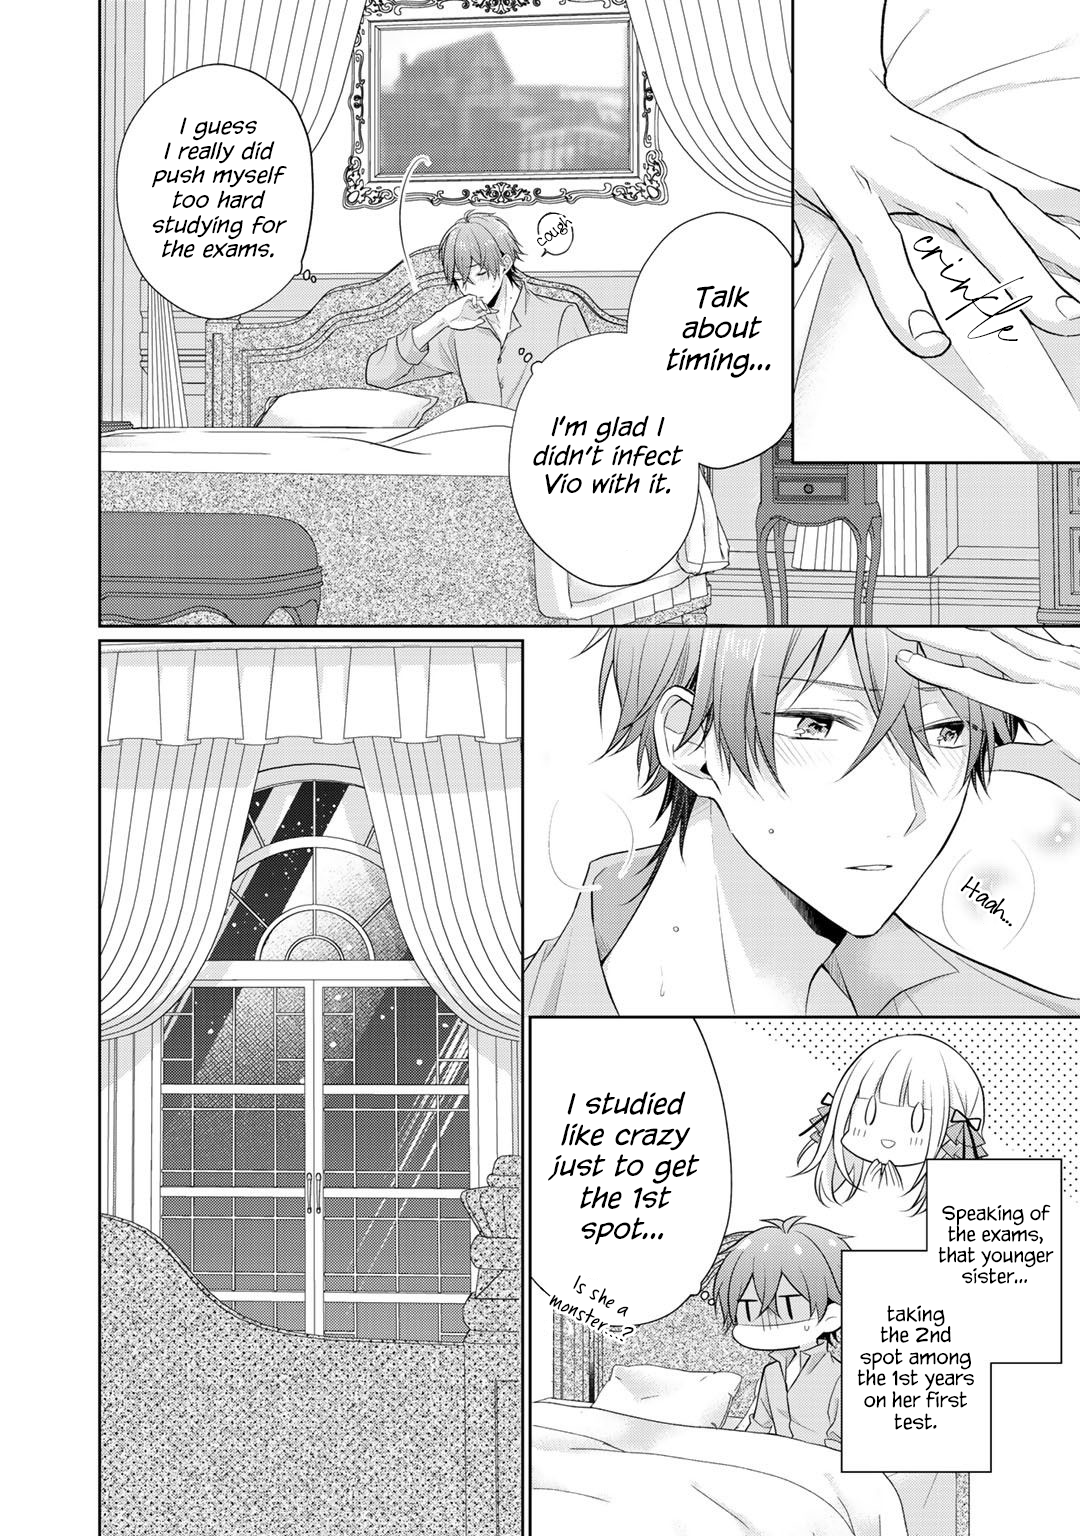 I Swear I Won’T Bother You Again! - Page 2